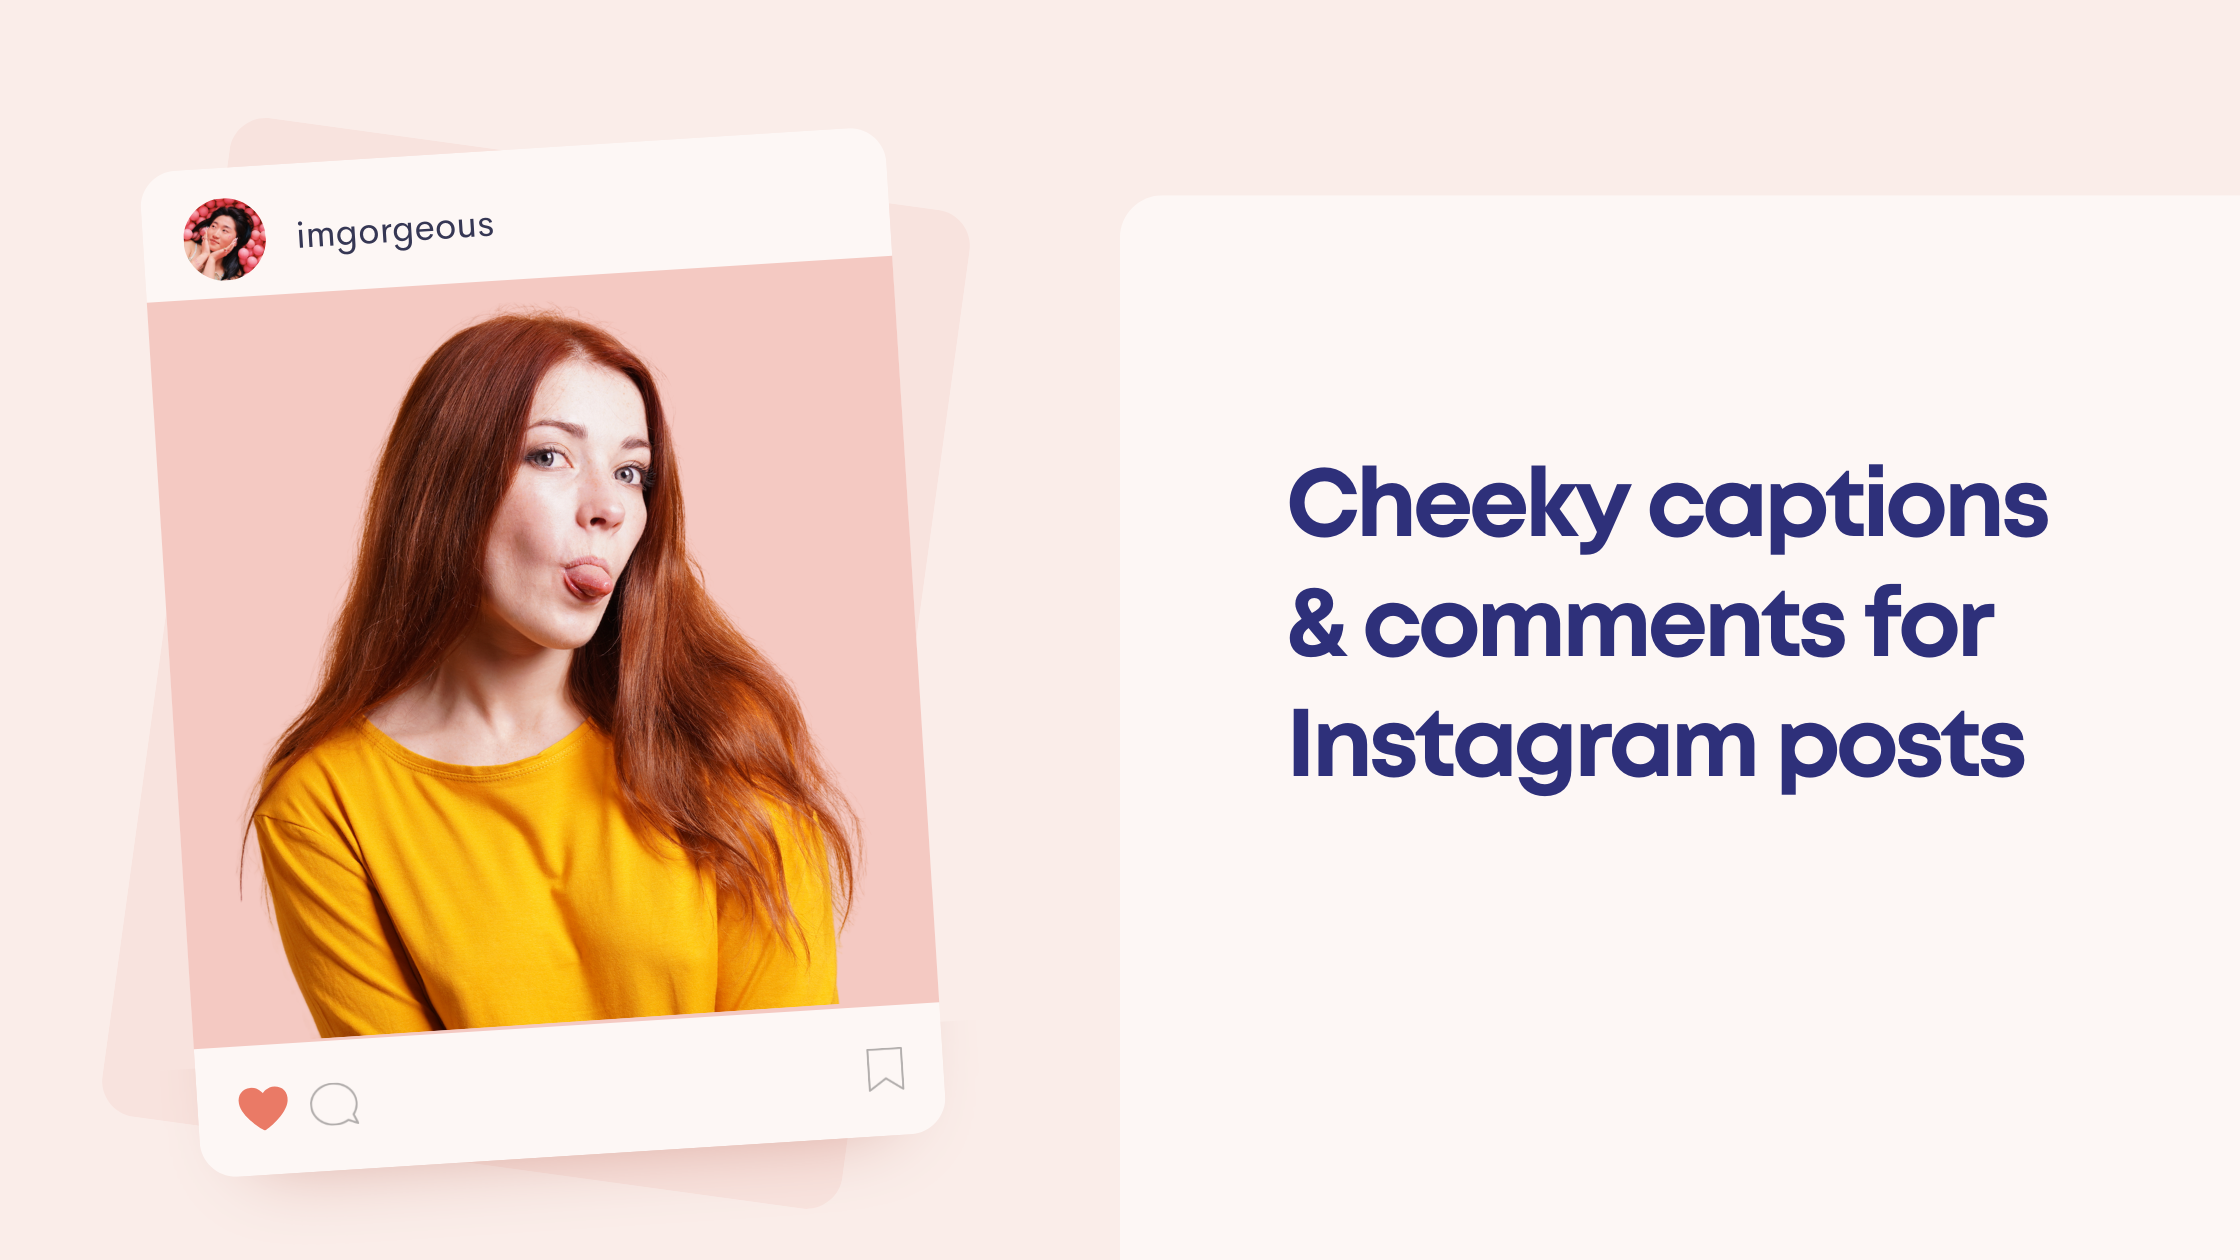 Remote.tools shares some cheeky comments & captions for Instagram comments